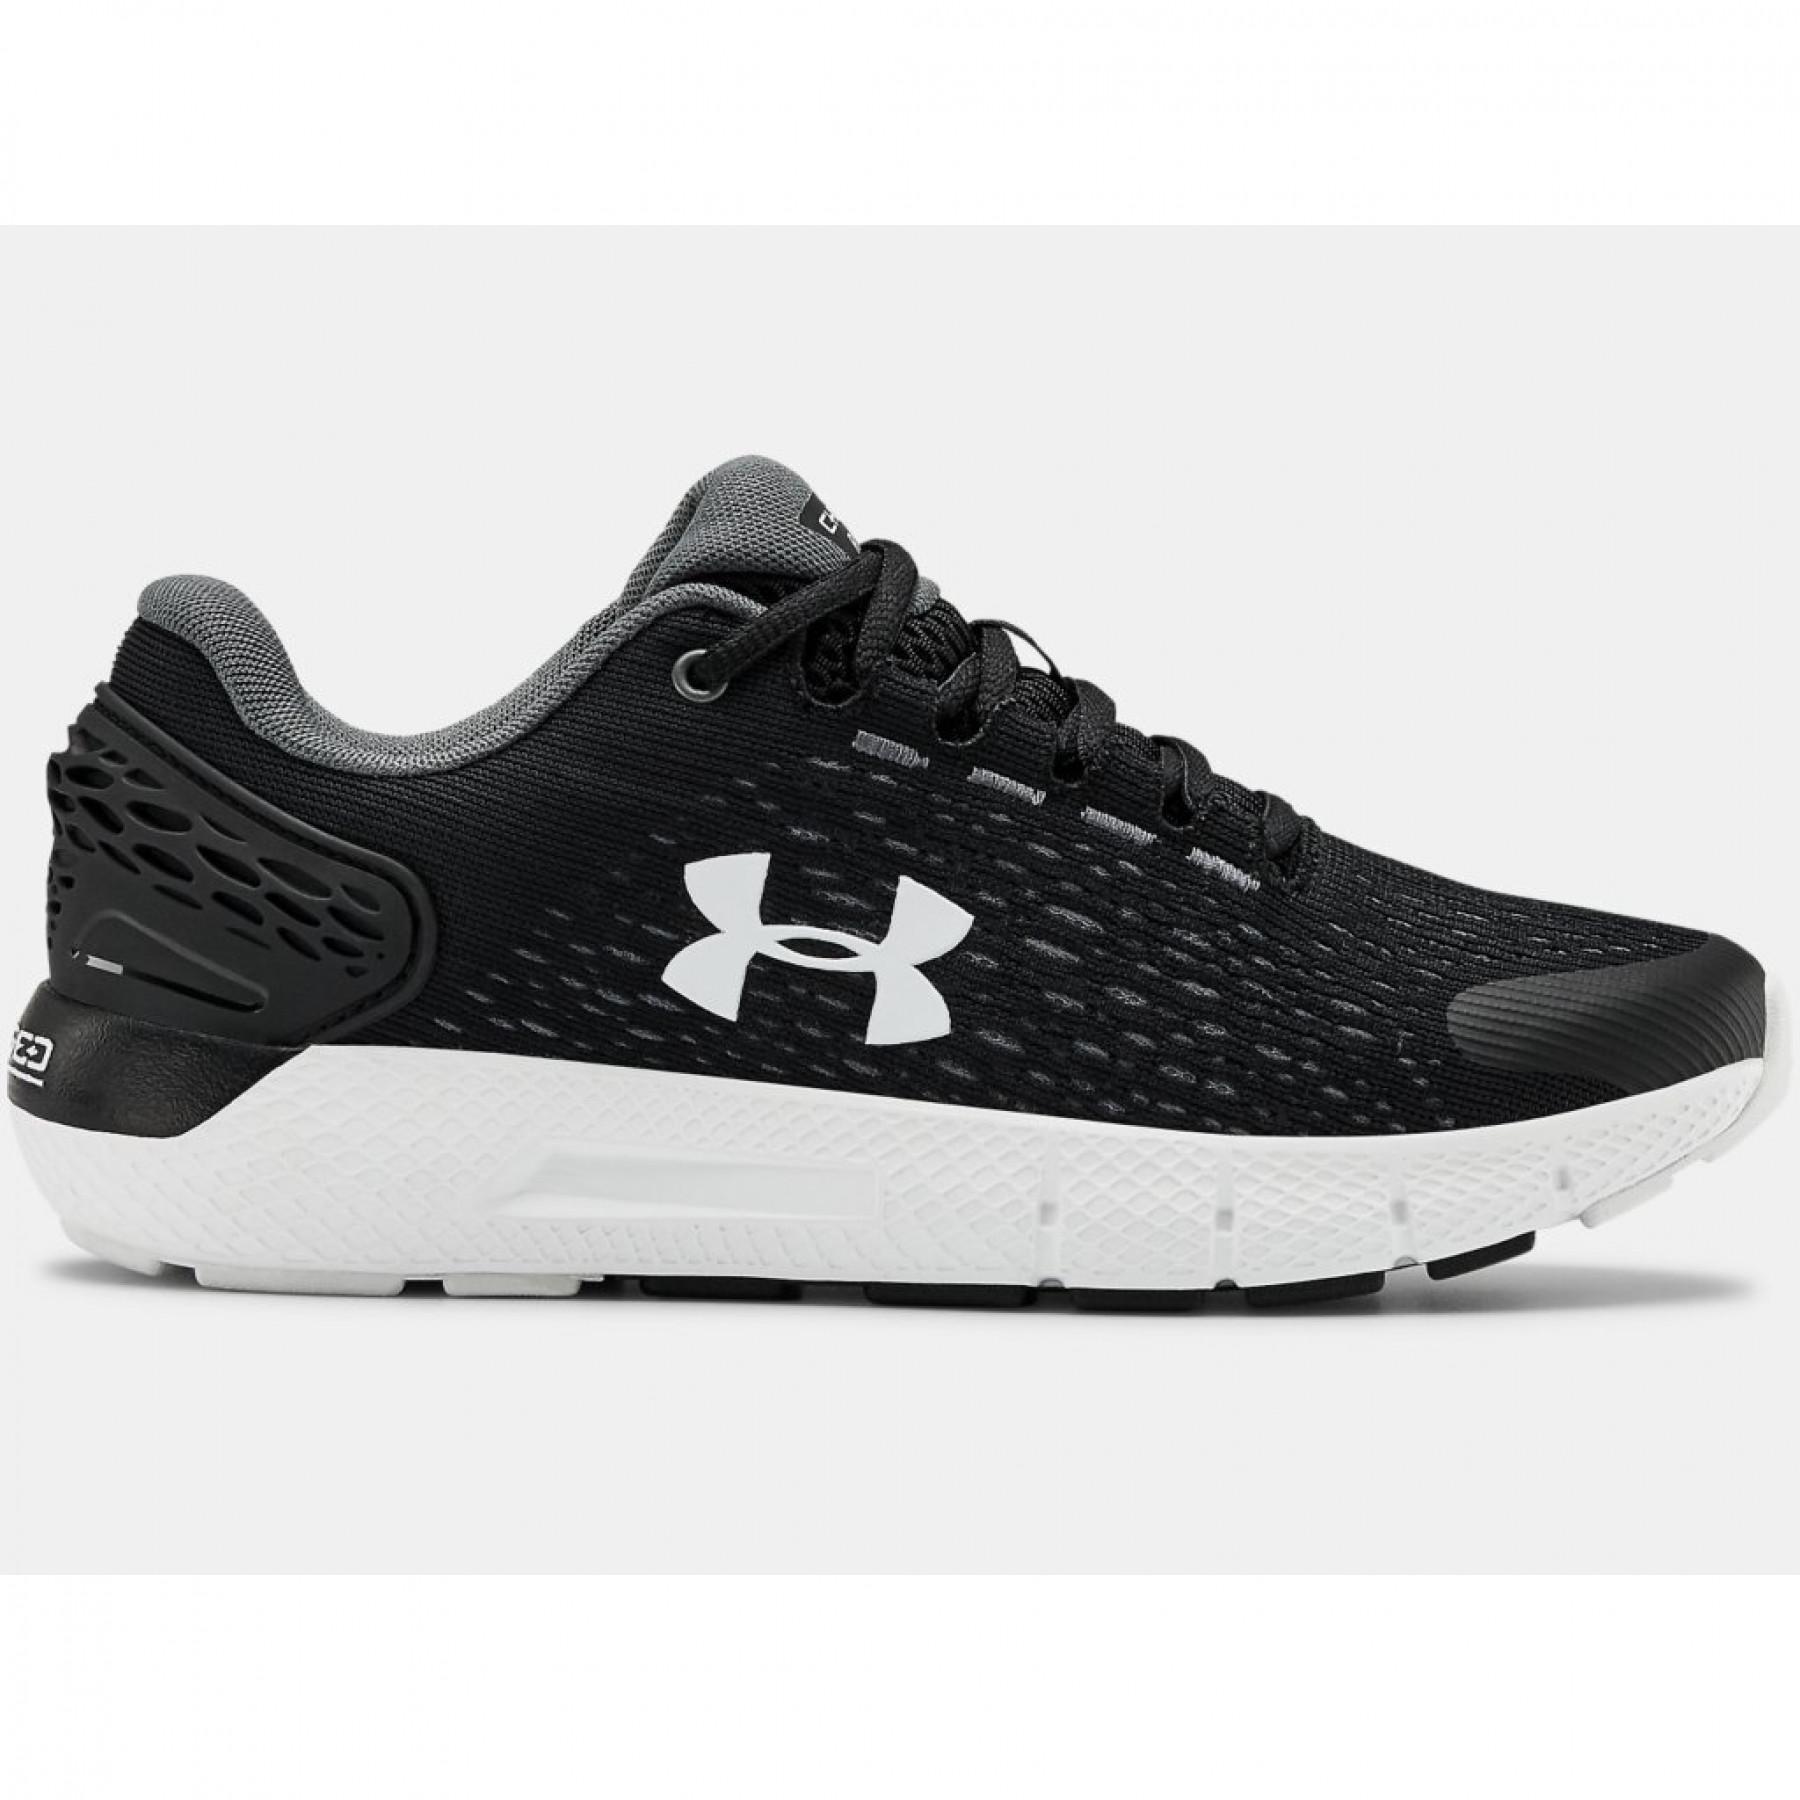 Children's shoes Under Armour Charged Rogue 2